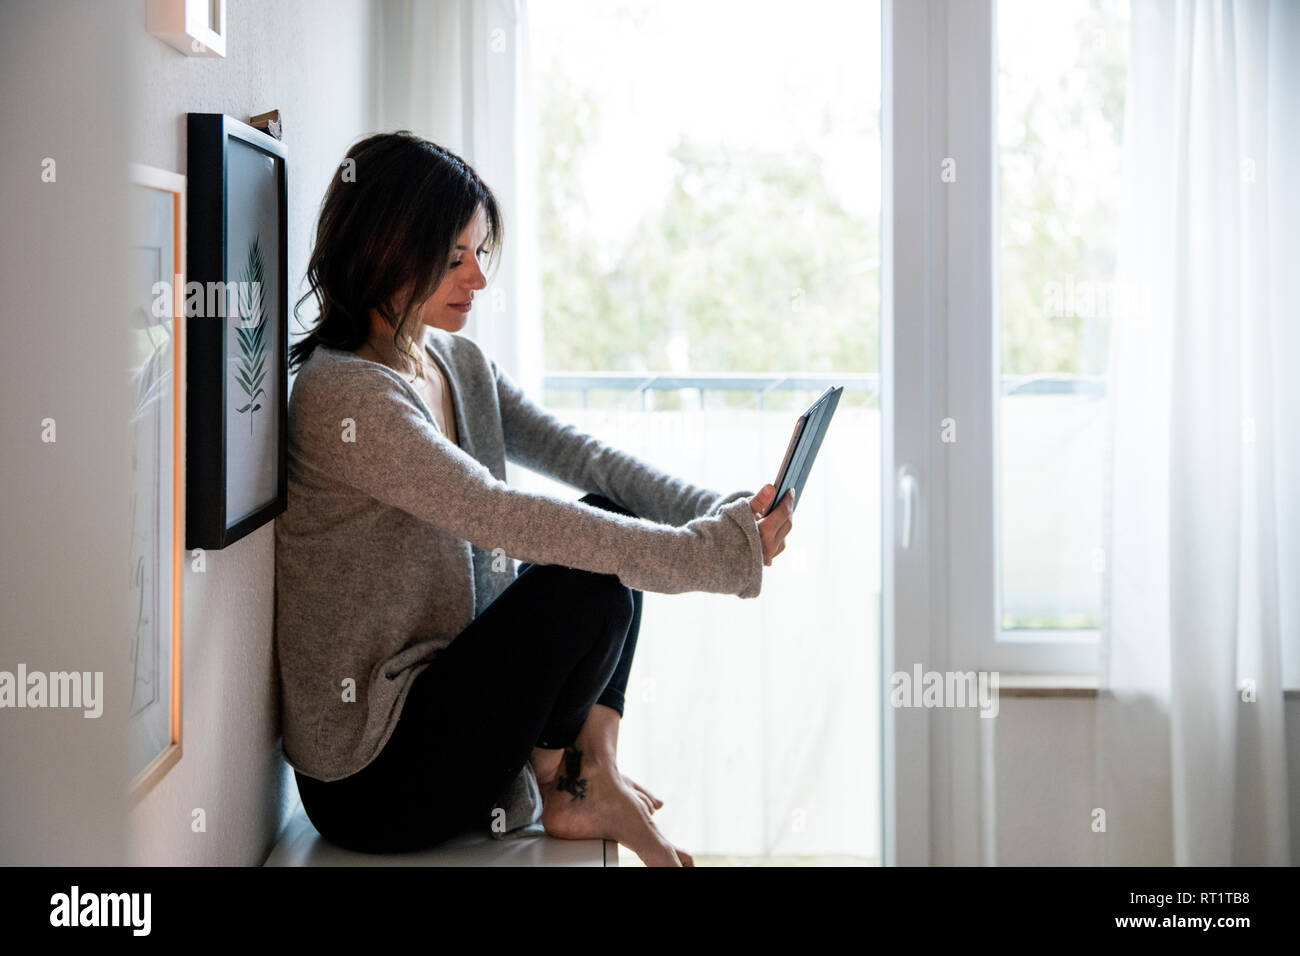 Woman sitting on chest of drawers, reding e-book Stock Photo